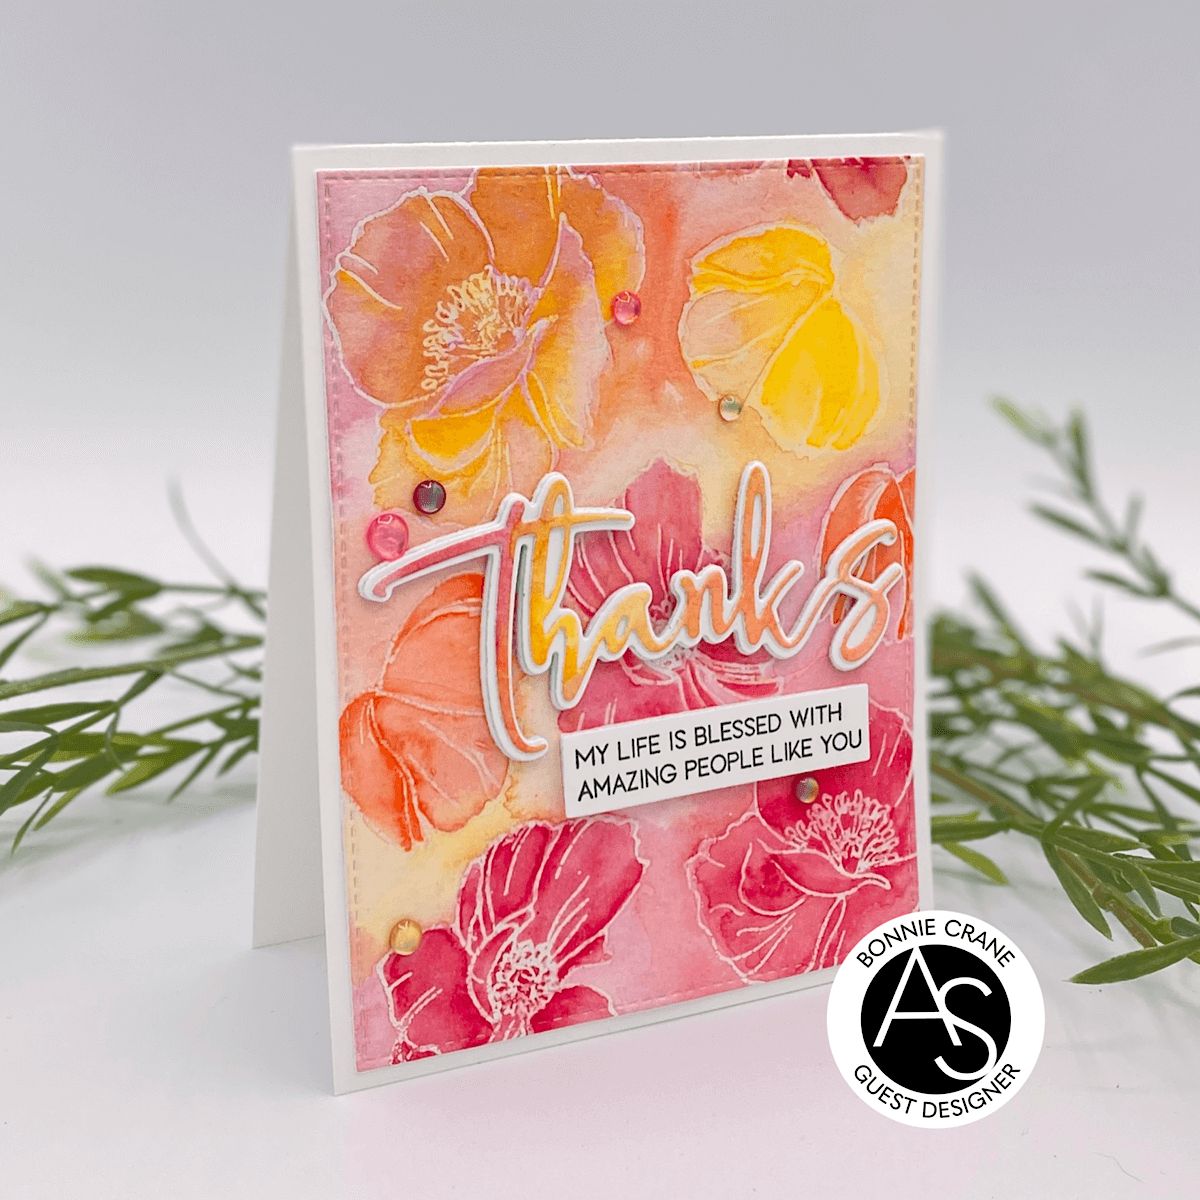 Expressing-Gratitude-Sentiments-Stamp-alex-syberia-designs-cardmaking-thankyou-cards-die-cutting-ideas-sentiments-poppies-stamp-thanks-hot-foil-plate-die